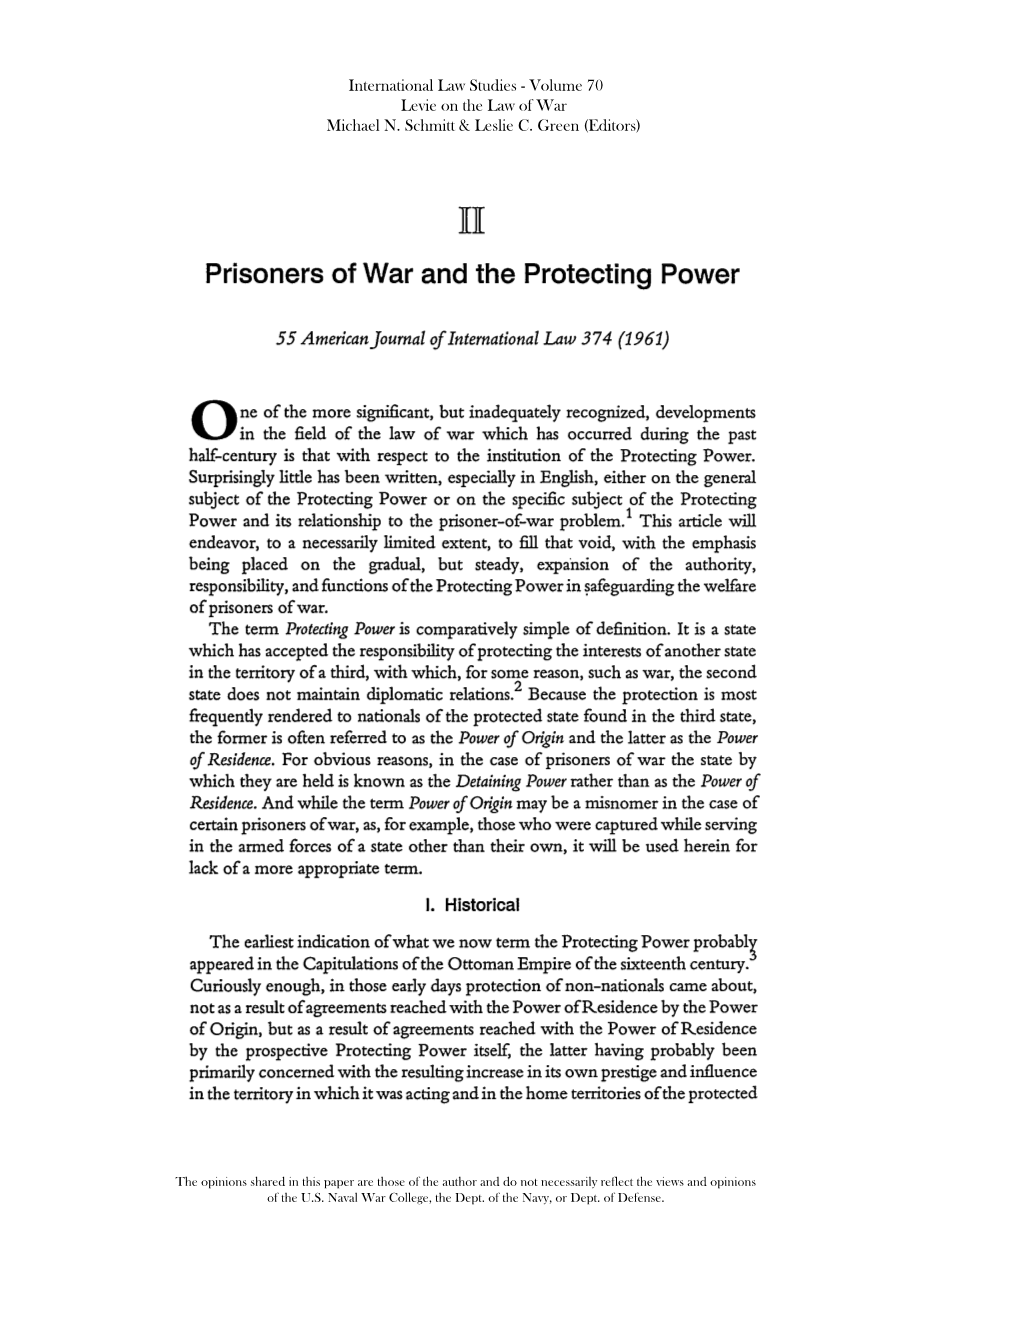 Prisoners of War and the Protecting Power